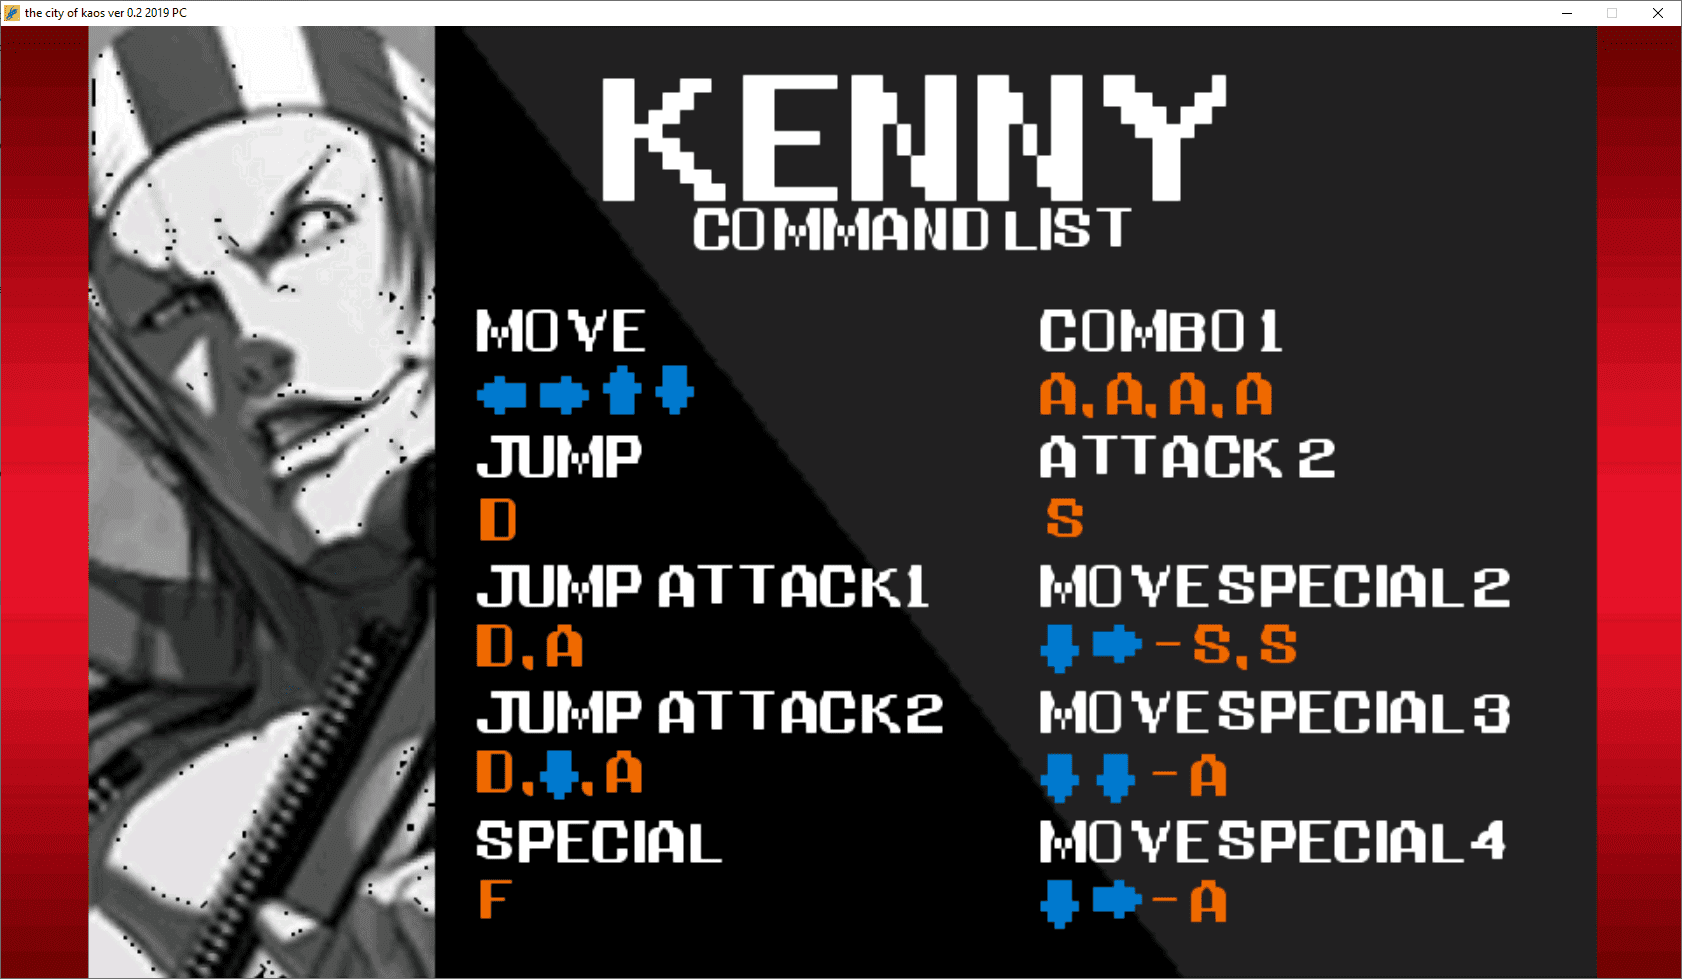 Kenny-city of kaos-command-linst